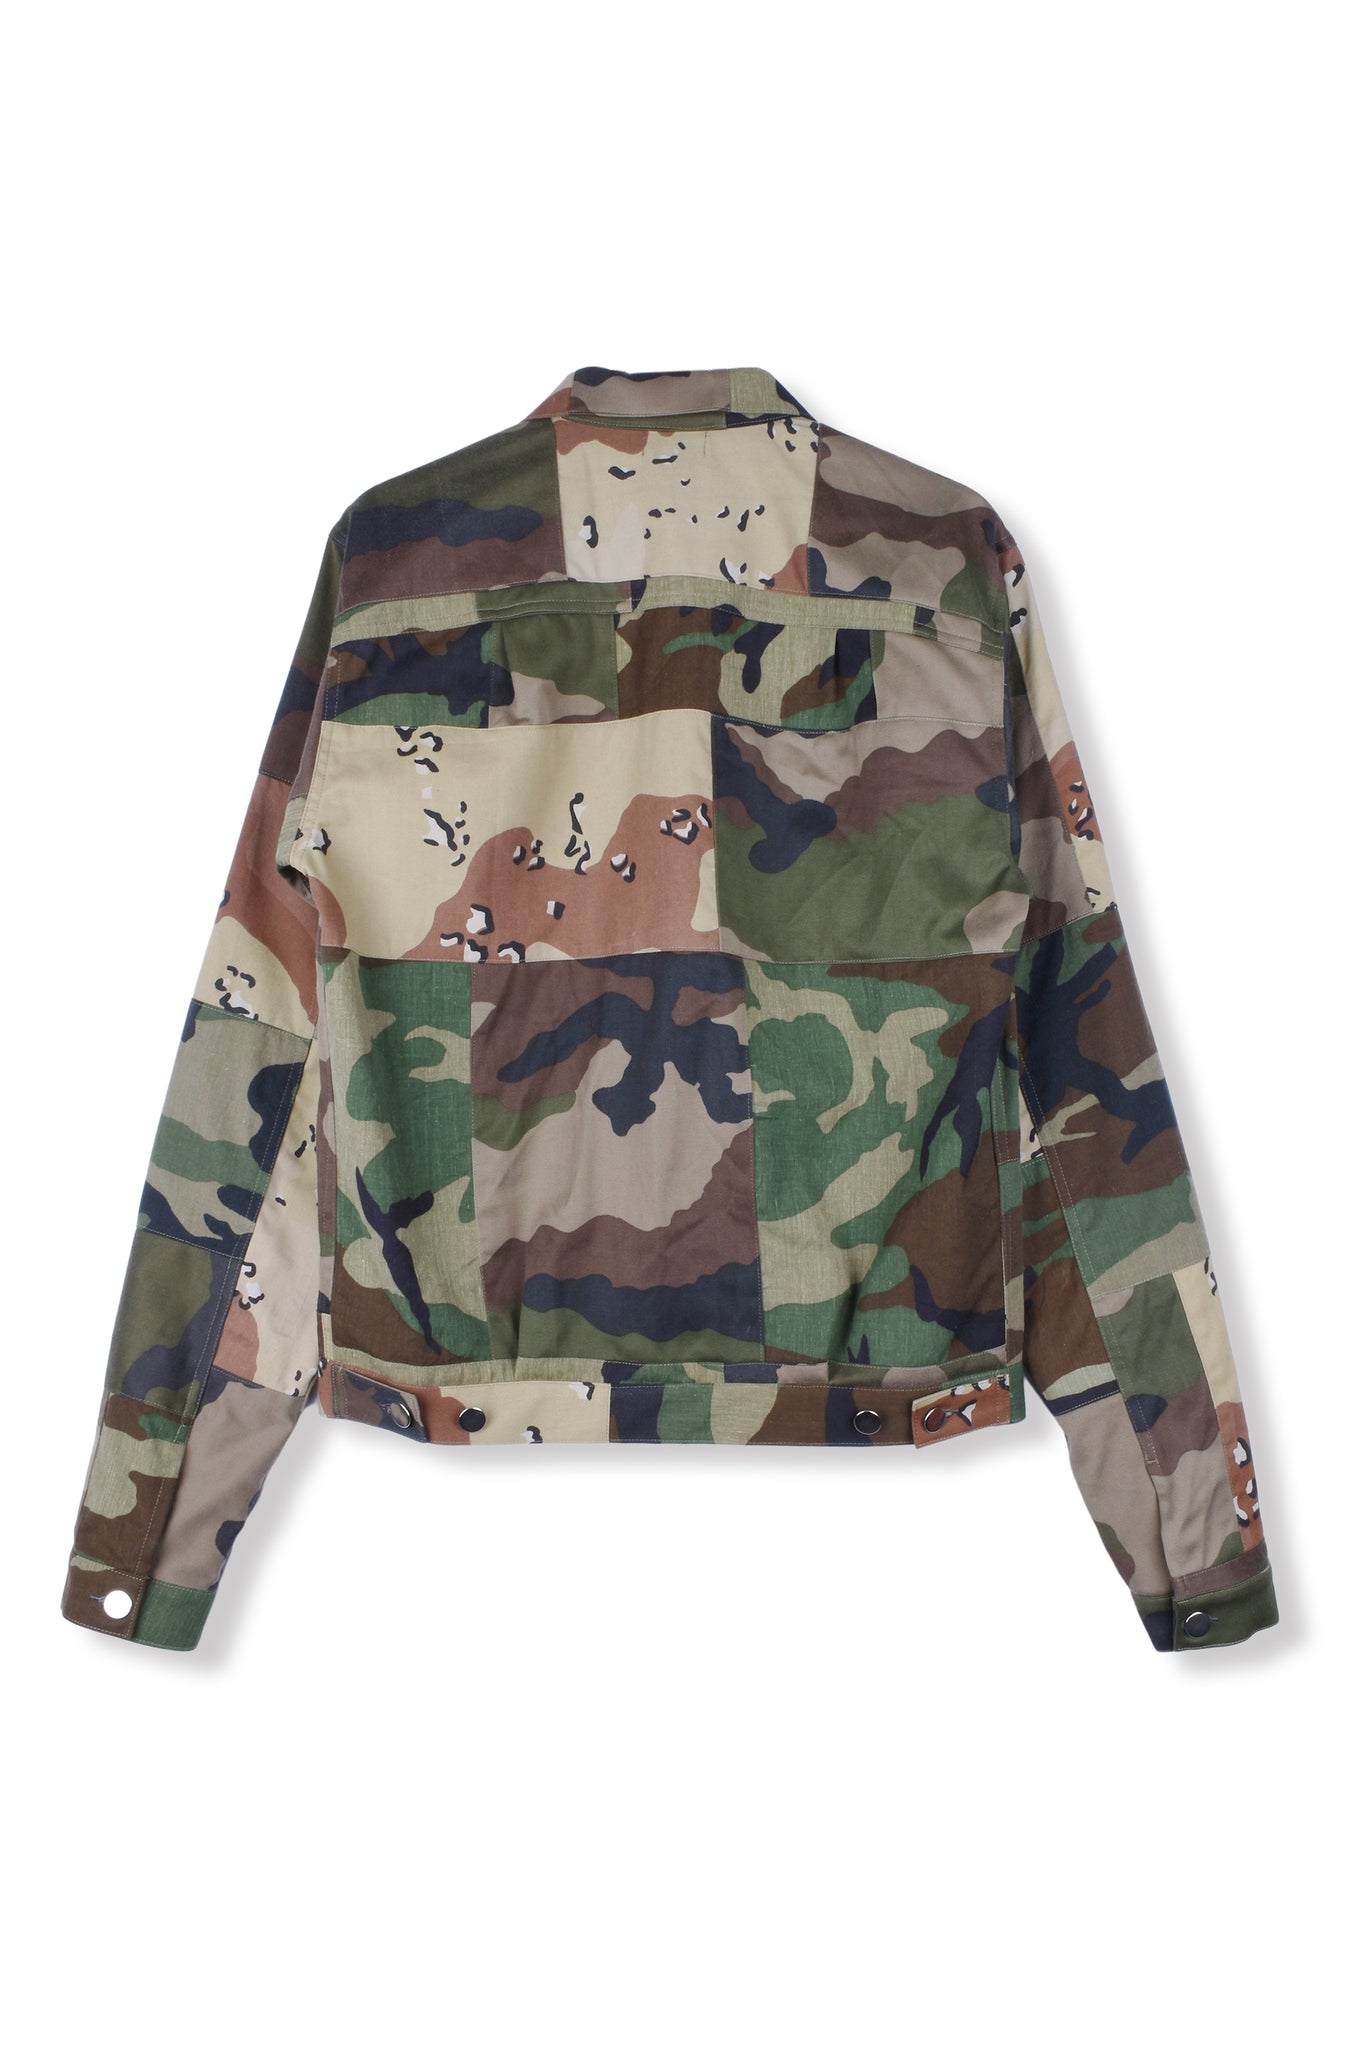 ONE-OFF CAMOUFLAGE PATCHWORKED JACKET 2ND TYPE